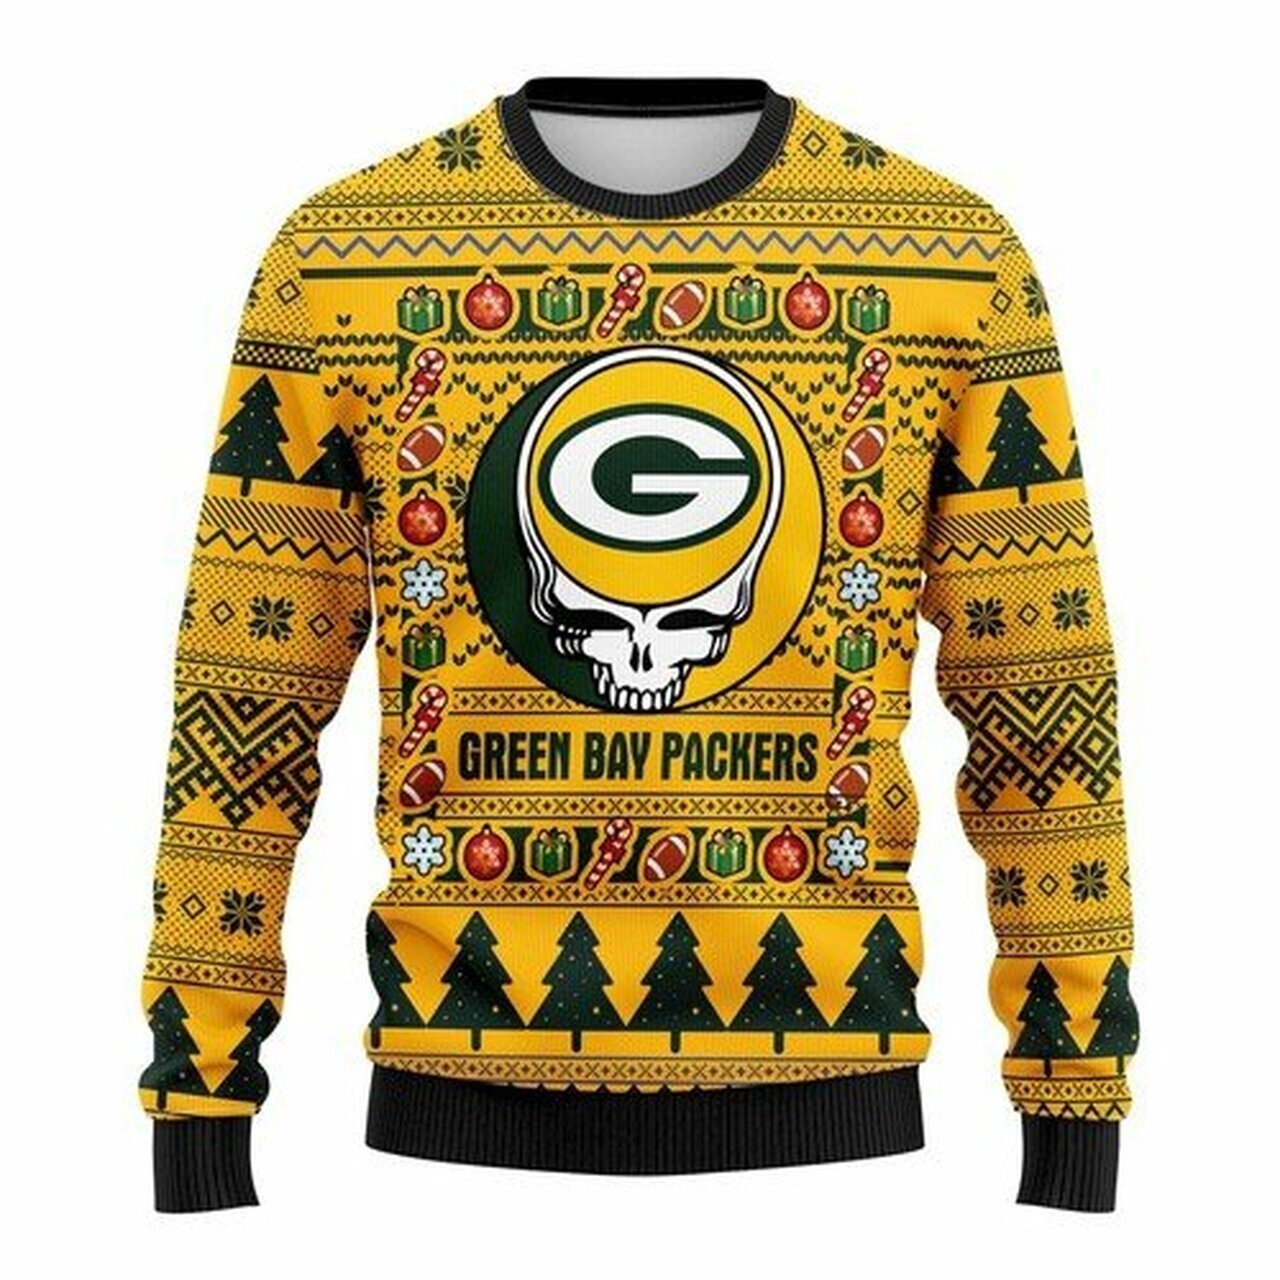 [ HOT ] NFL Green Bay Packers Grateful Dead ugly christmas sweater – Saleoff 040122